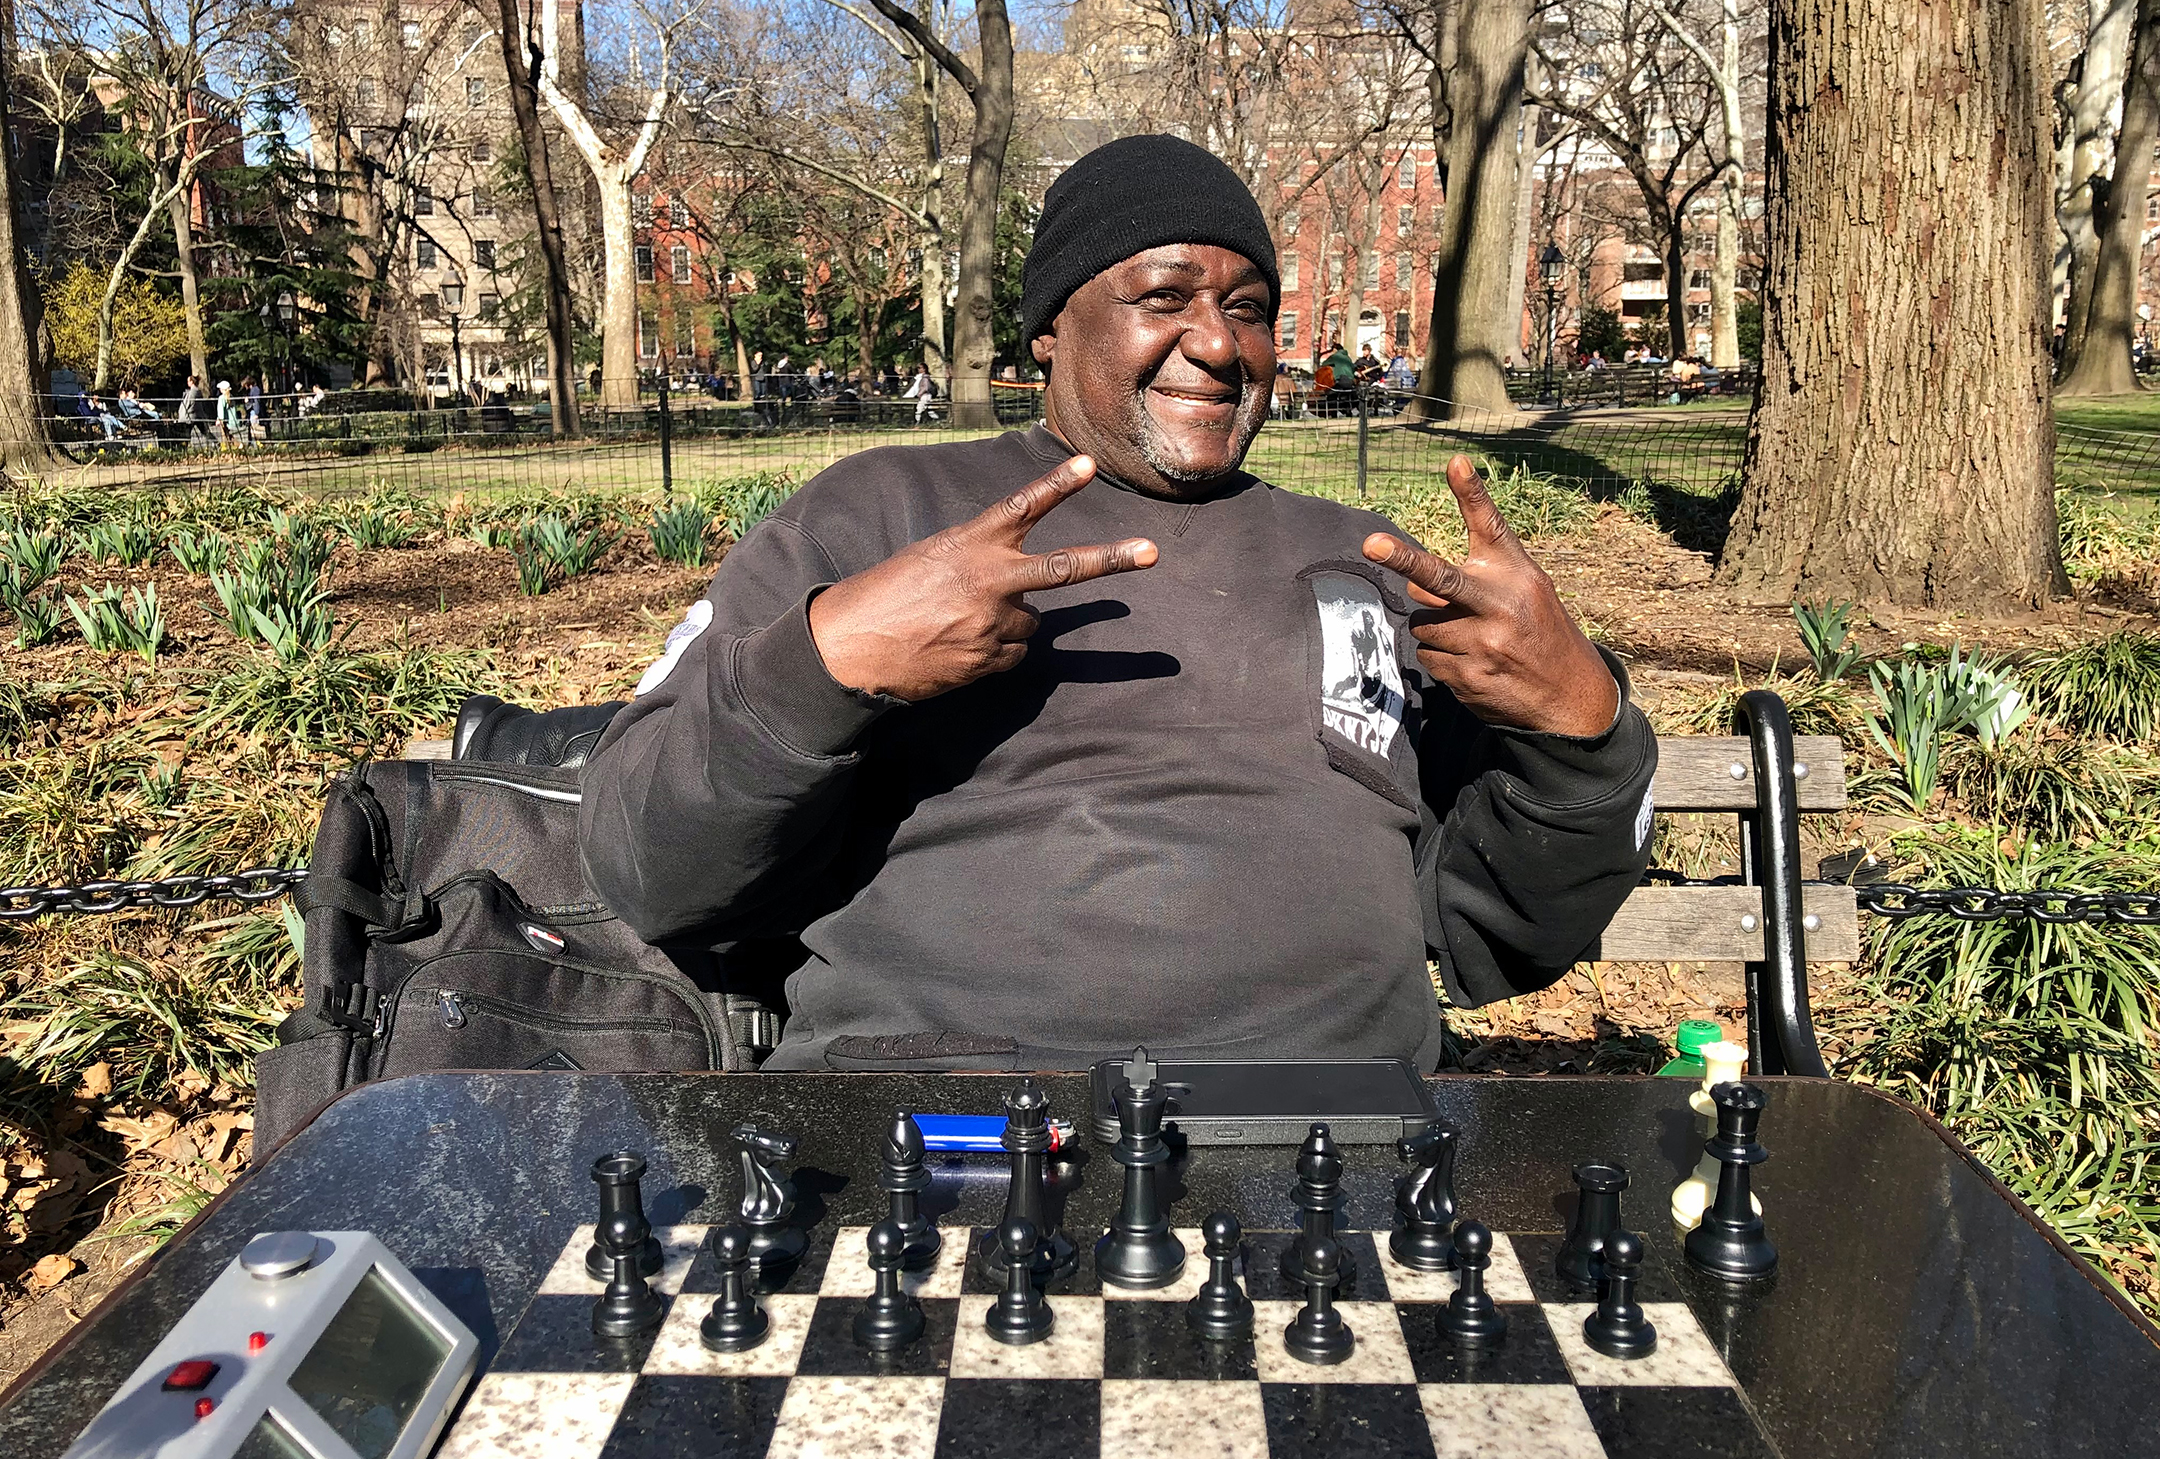 Older black man smiles and poses in front of an outdoor chess board